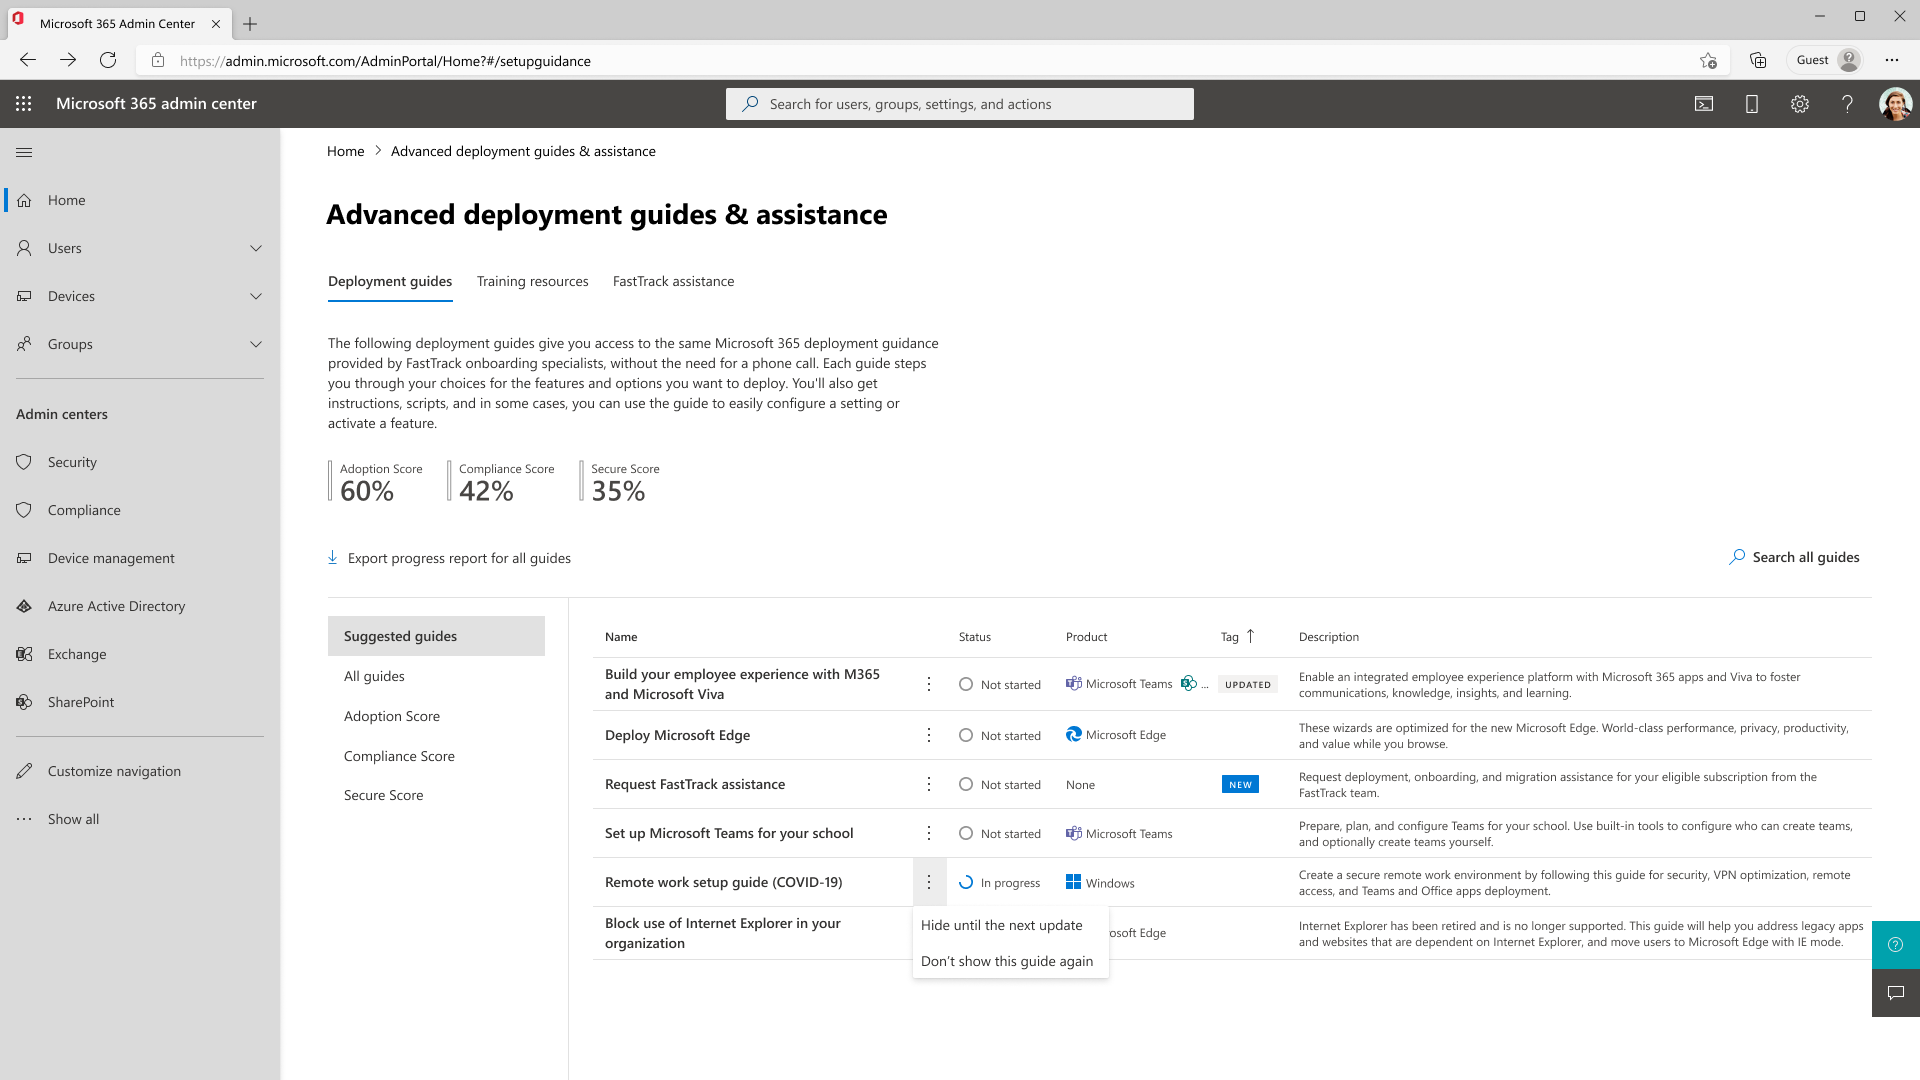 The Suggested guides view on the Advanced deployment guides & assistance page.